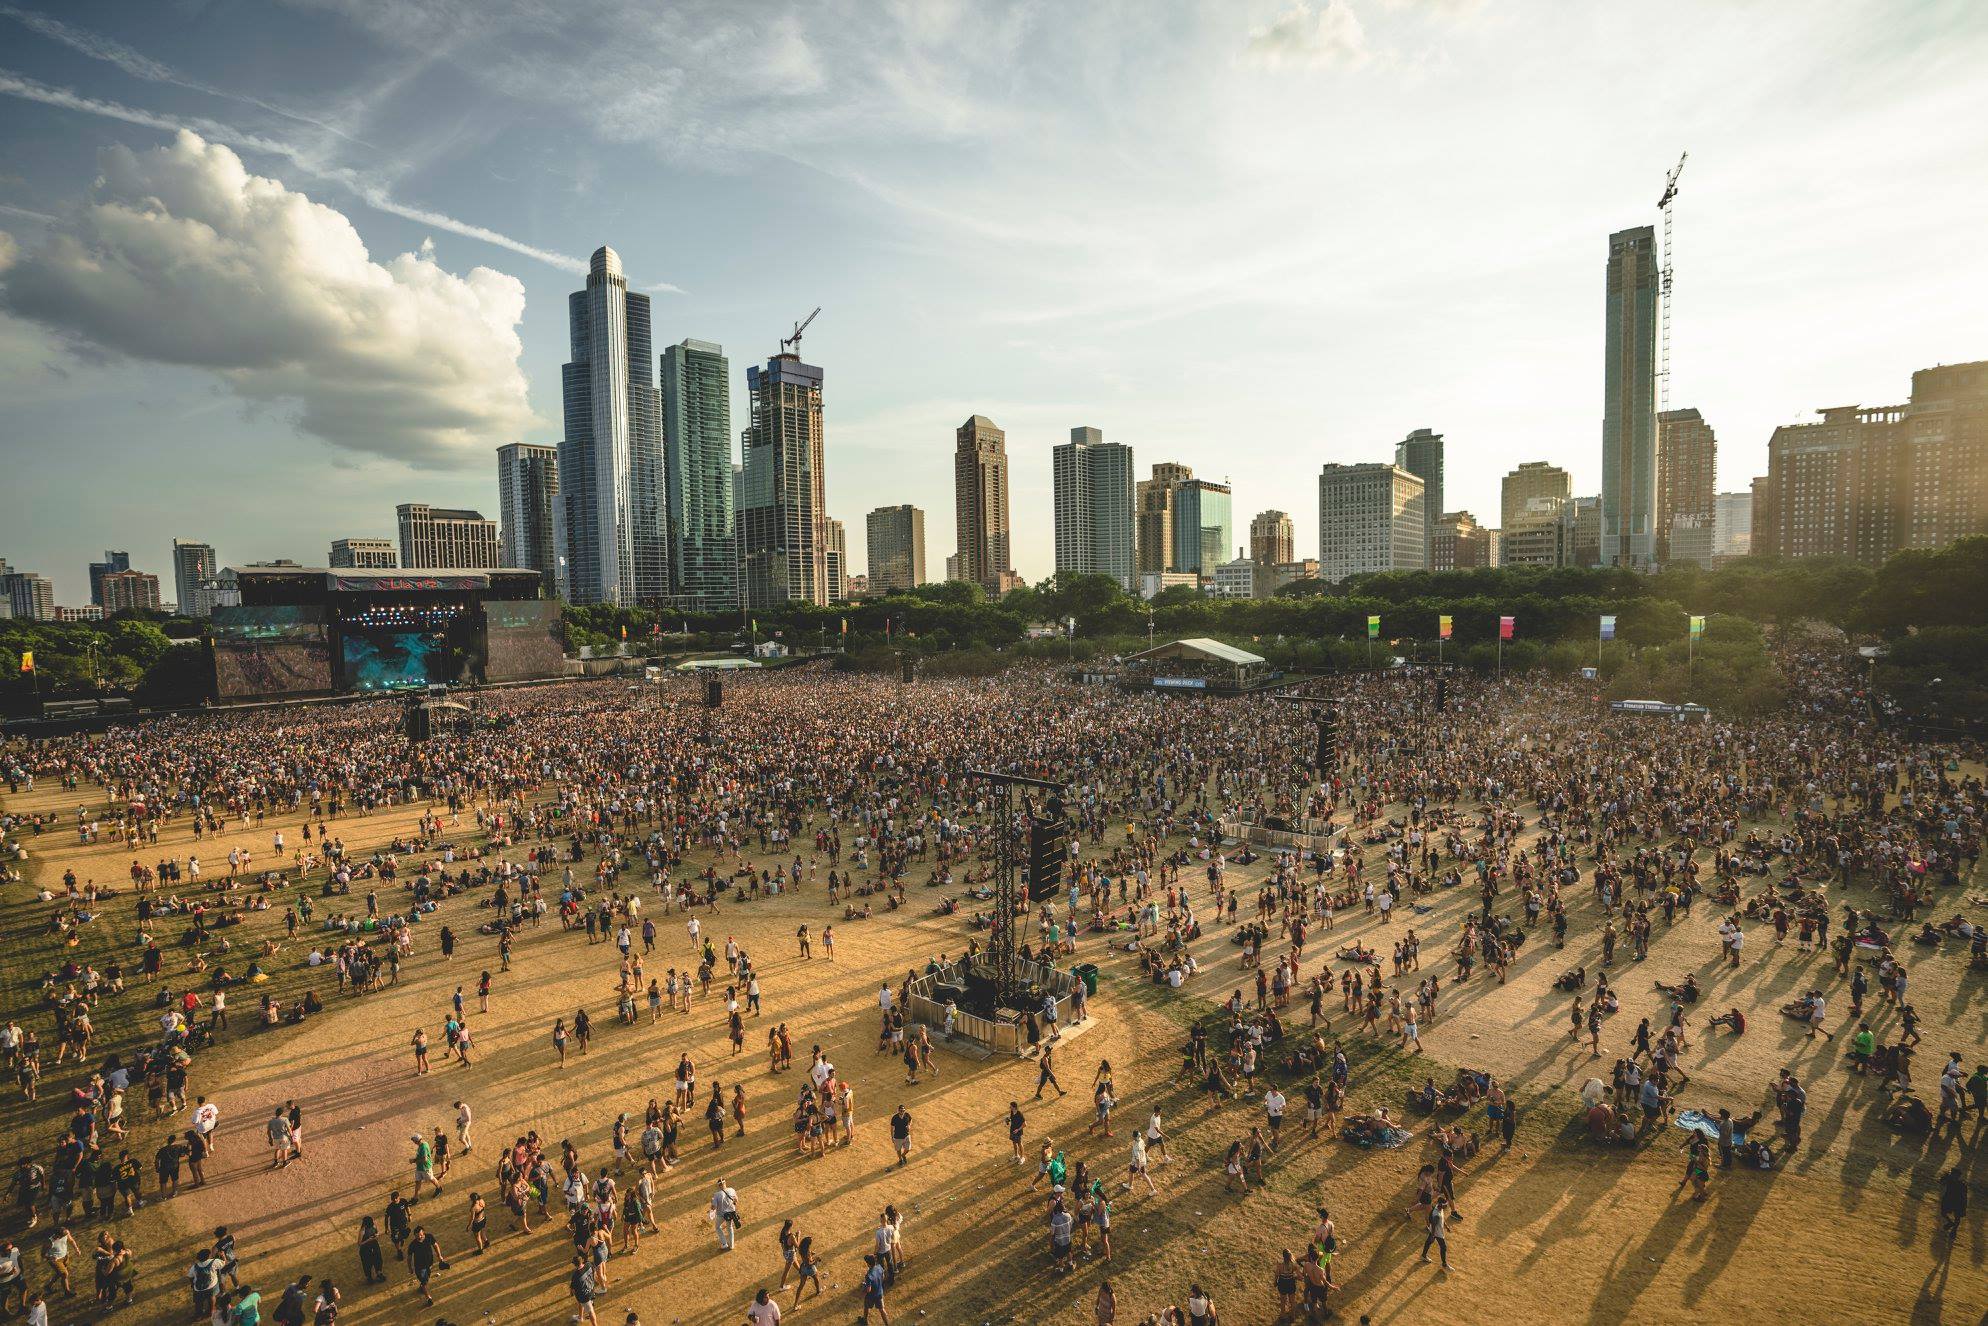 Lollapalooza Chicago 2019 Releases Daily Lineup1988 x 1326